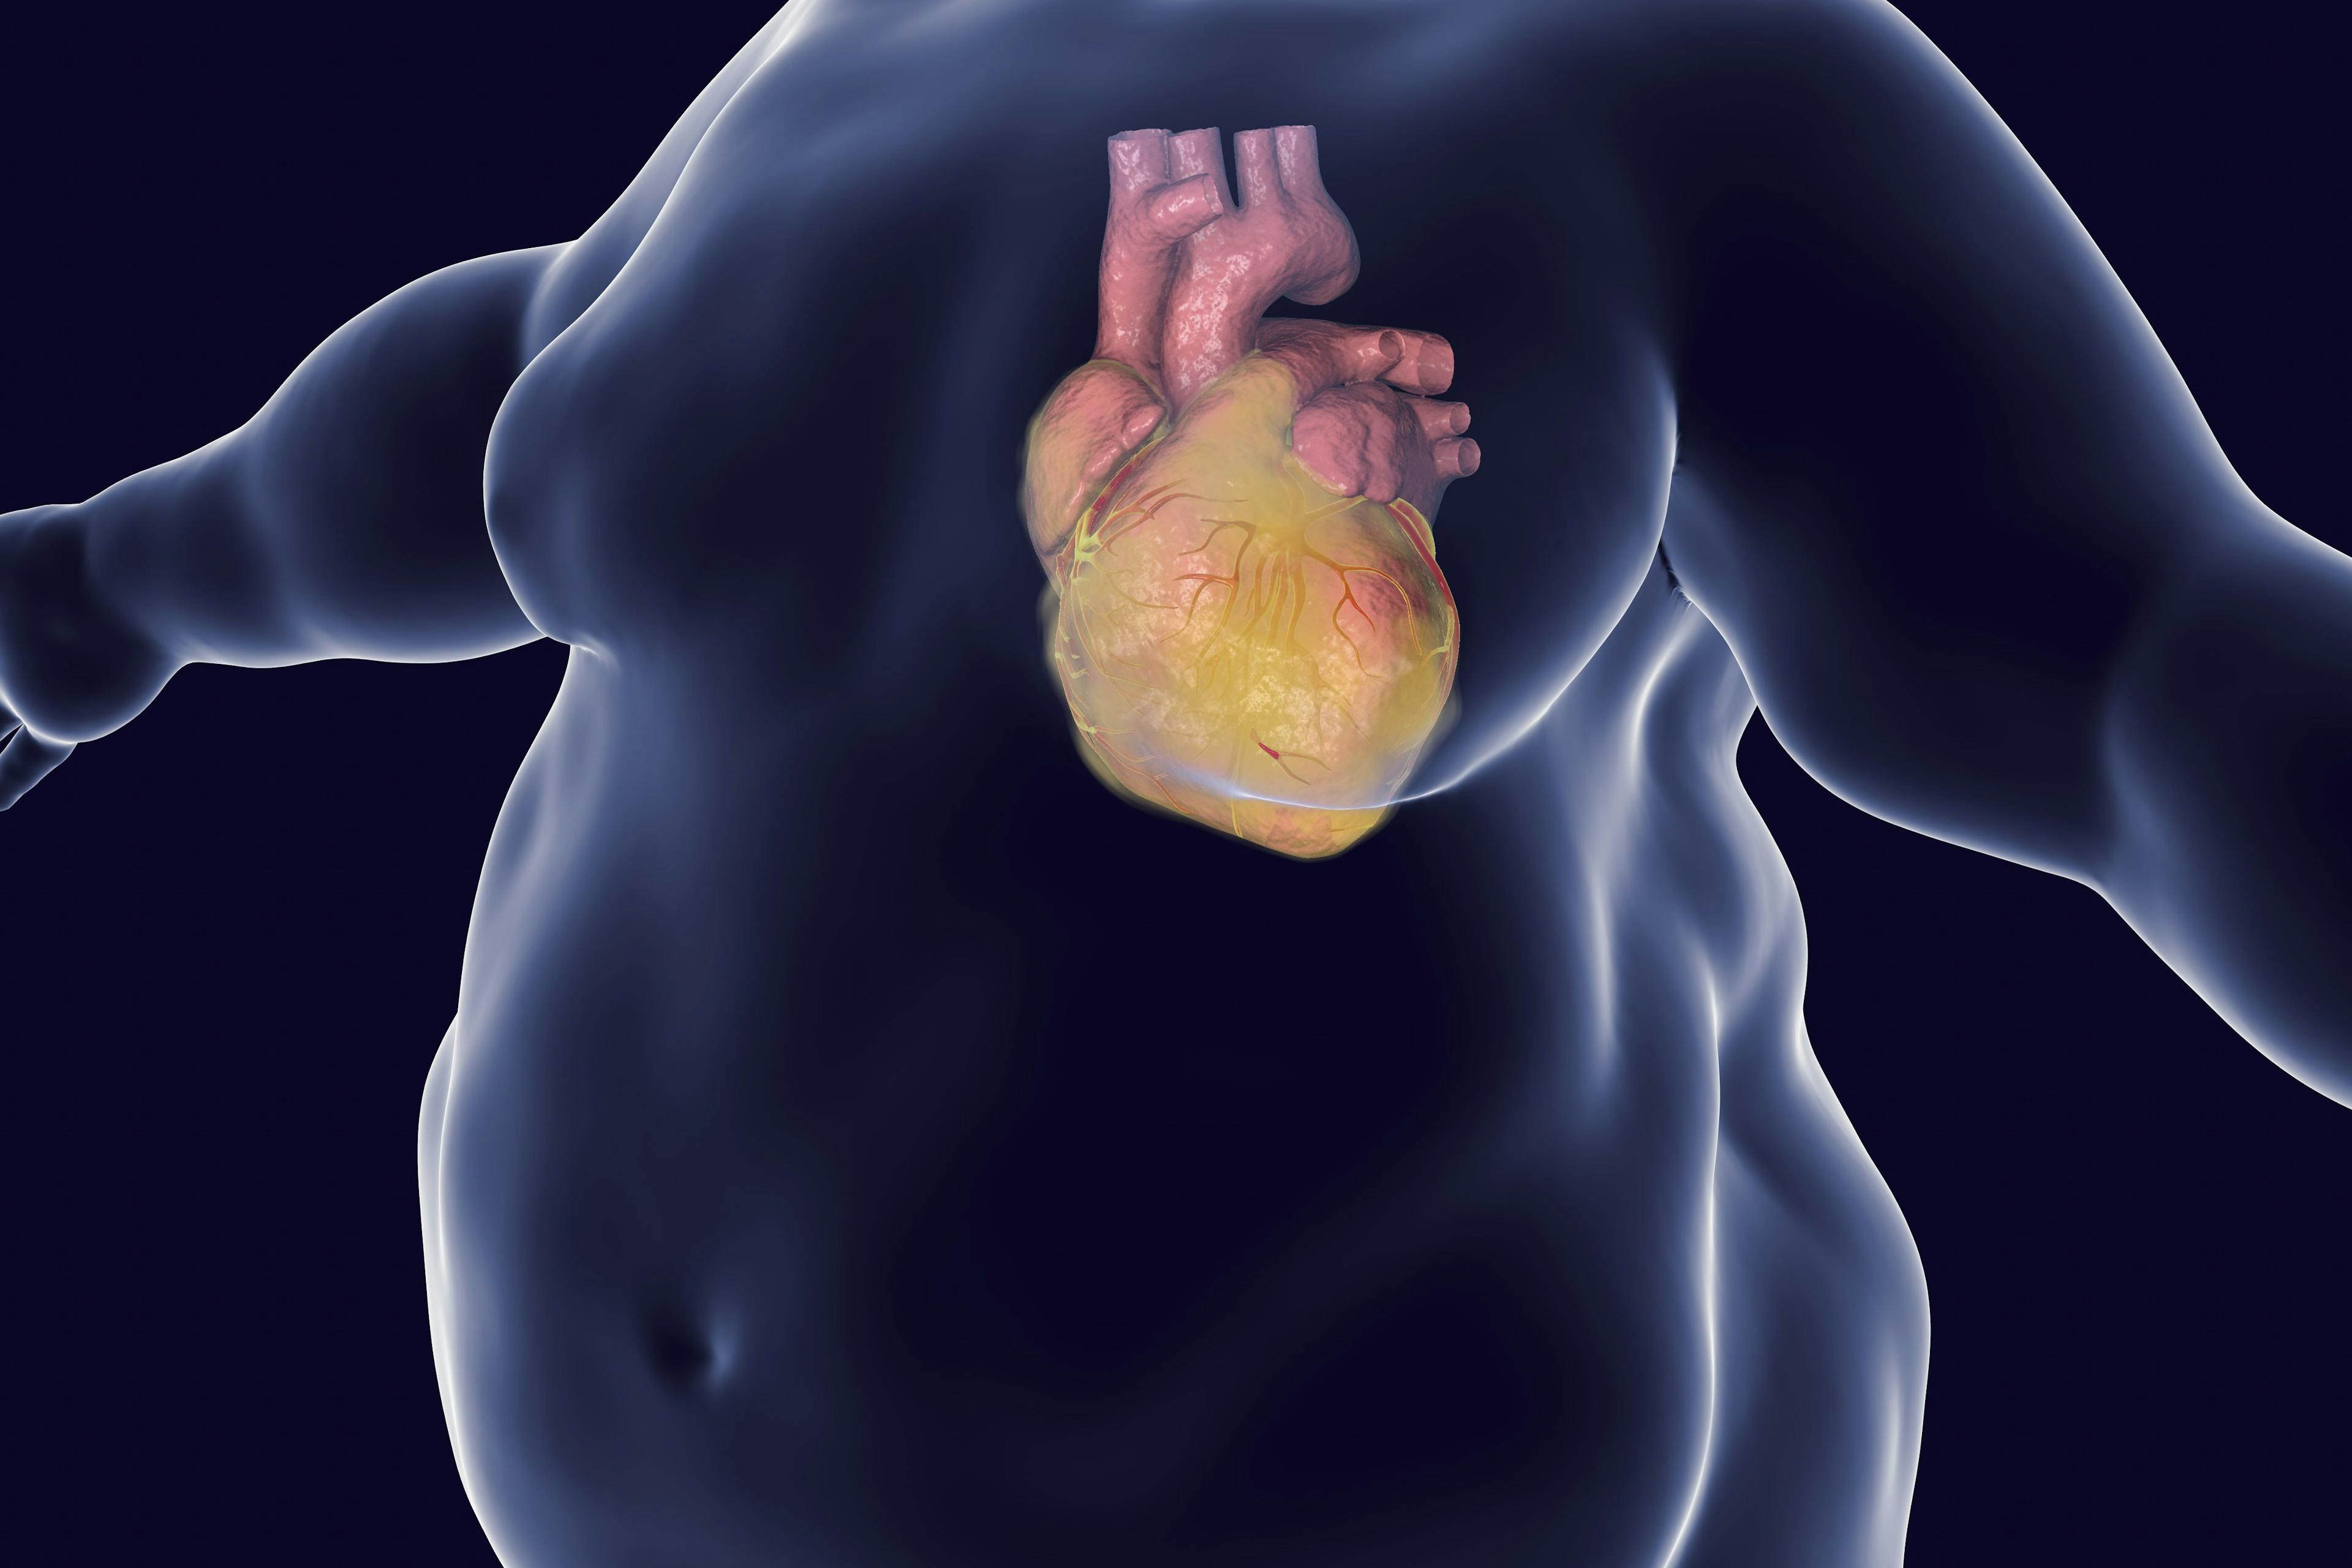 Heart disease in a person with obesity